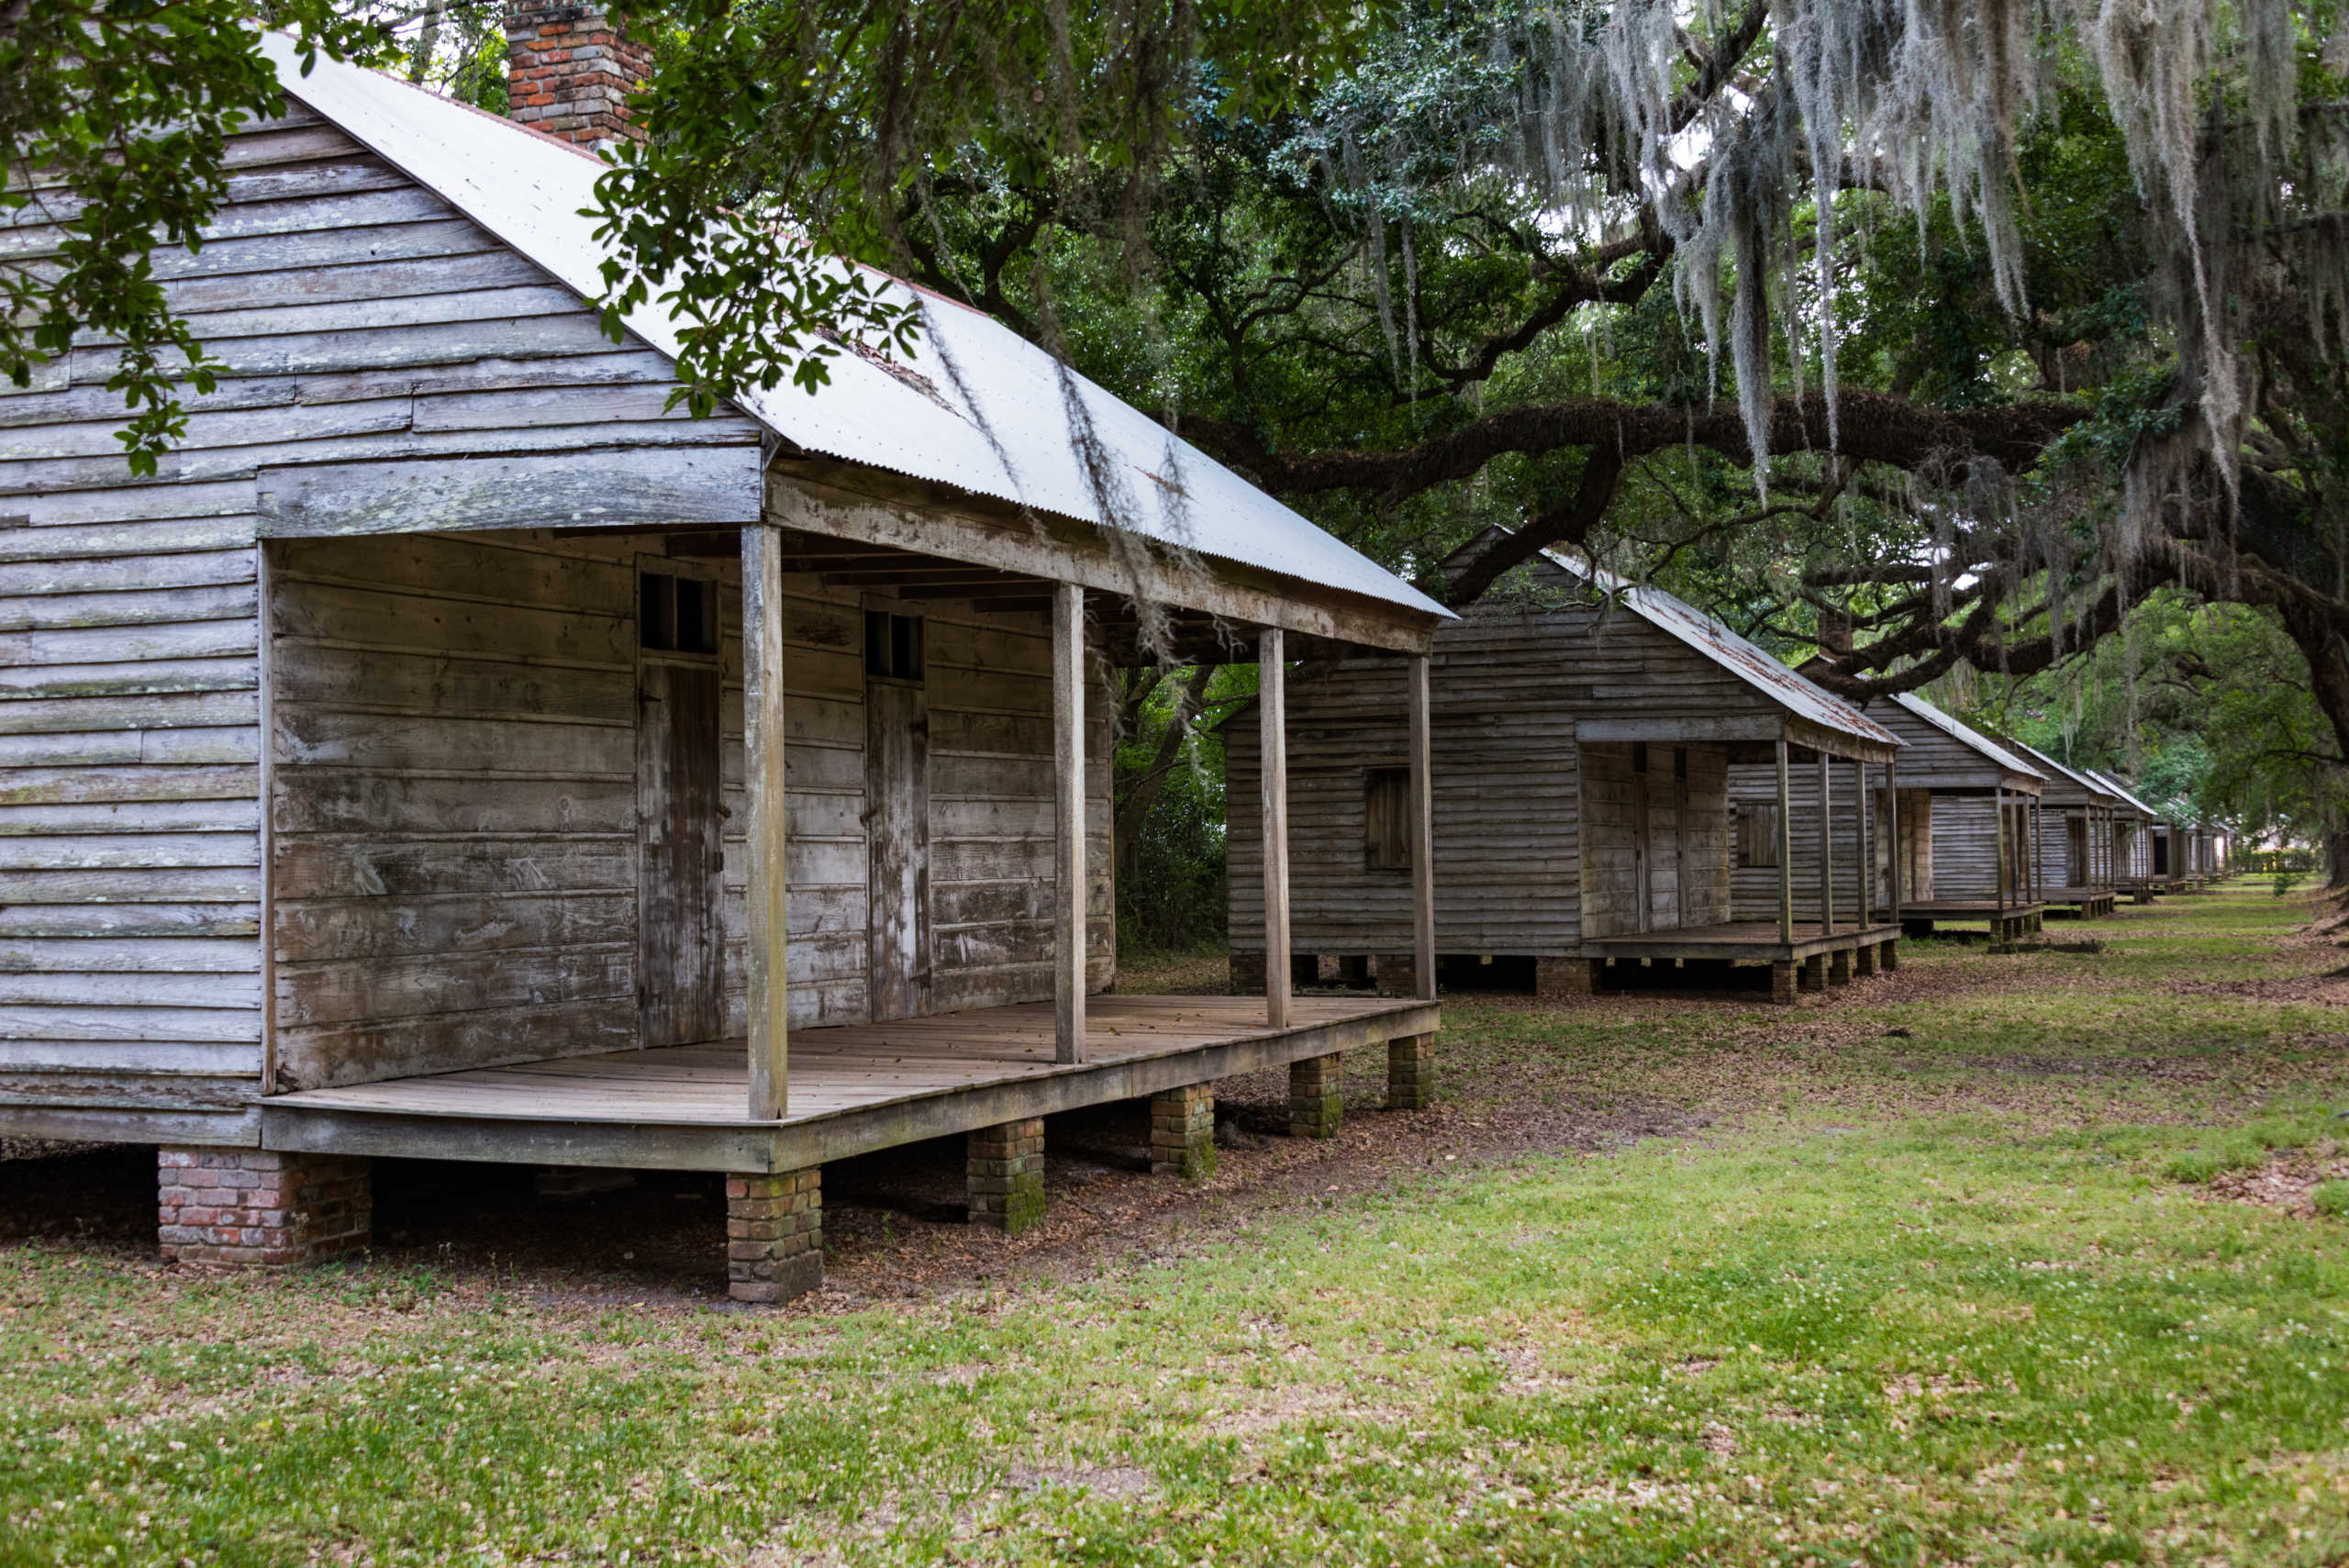 See the most intact plantation complex in New Orleans Plantation Country